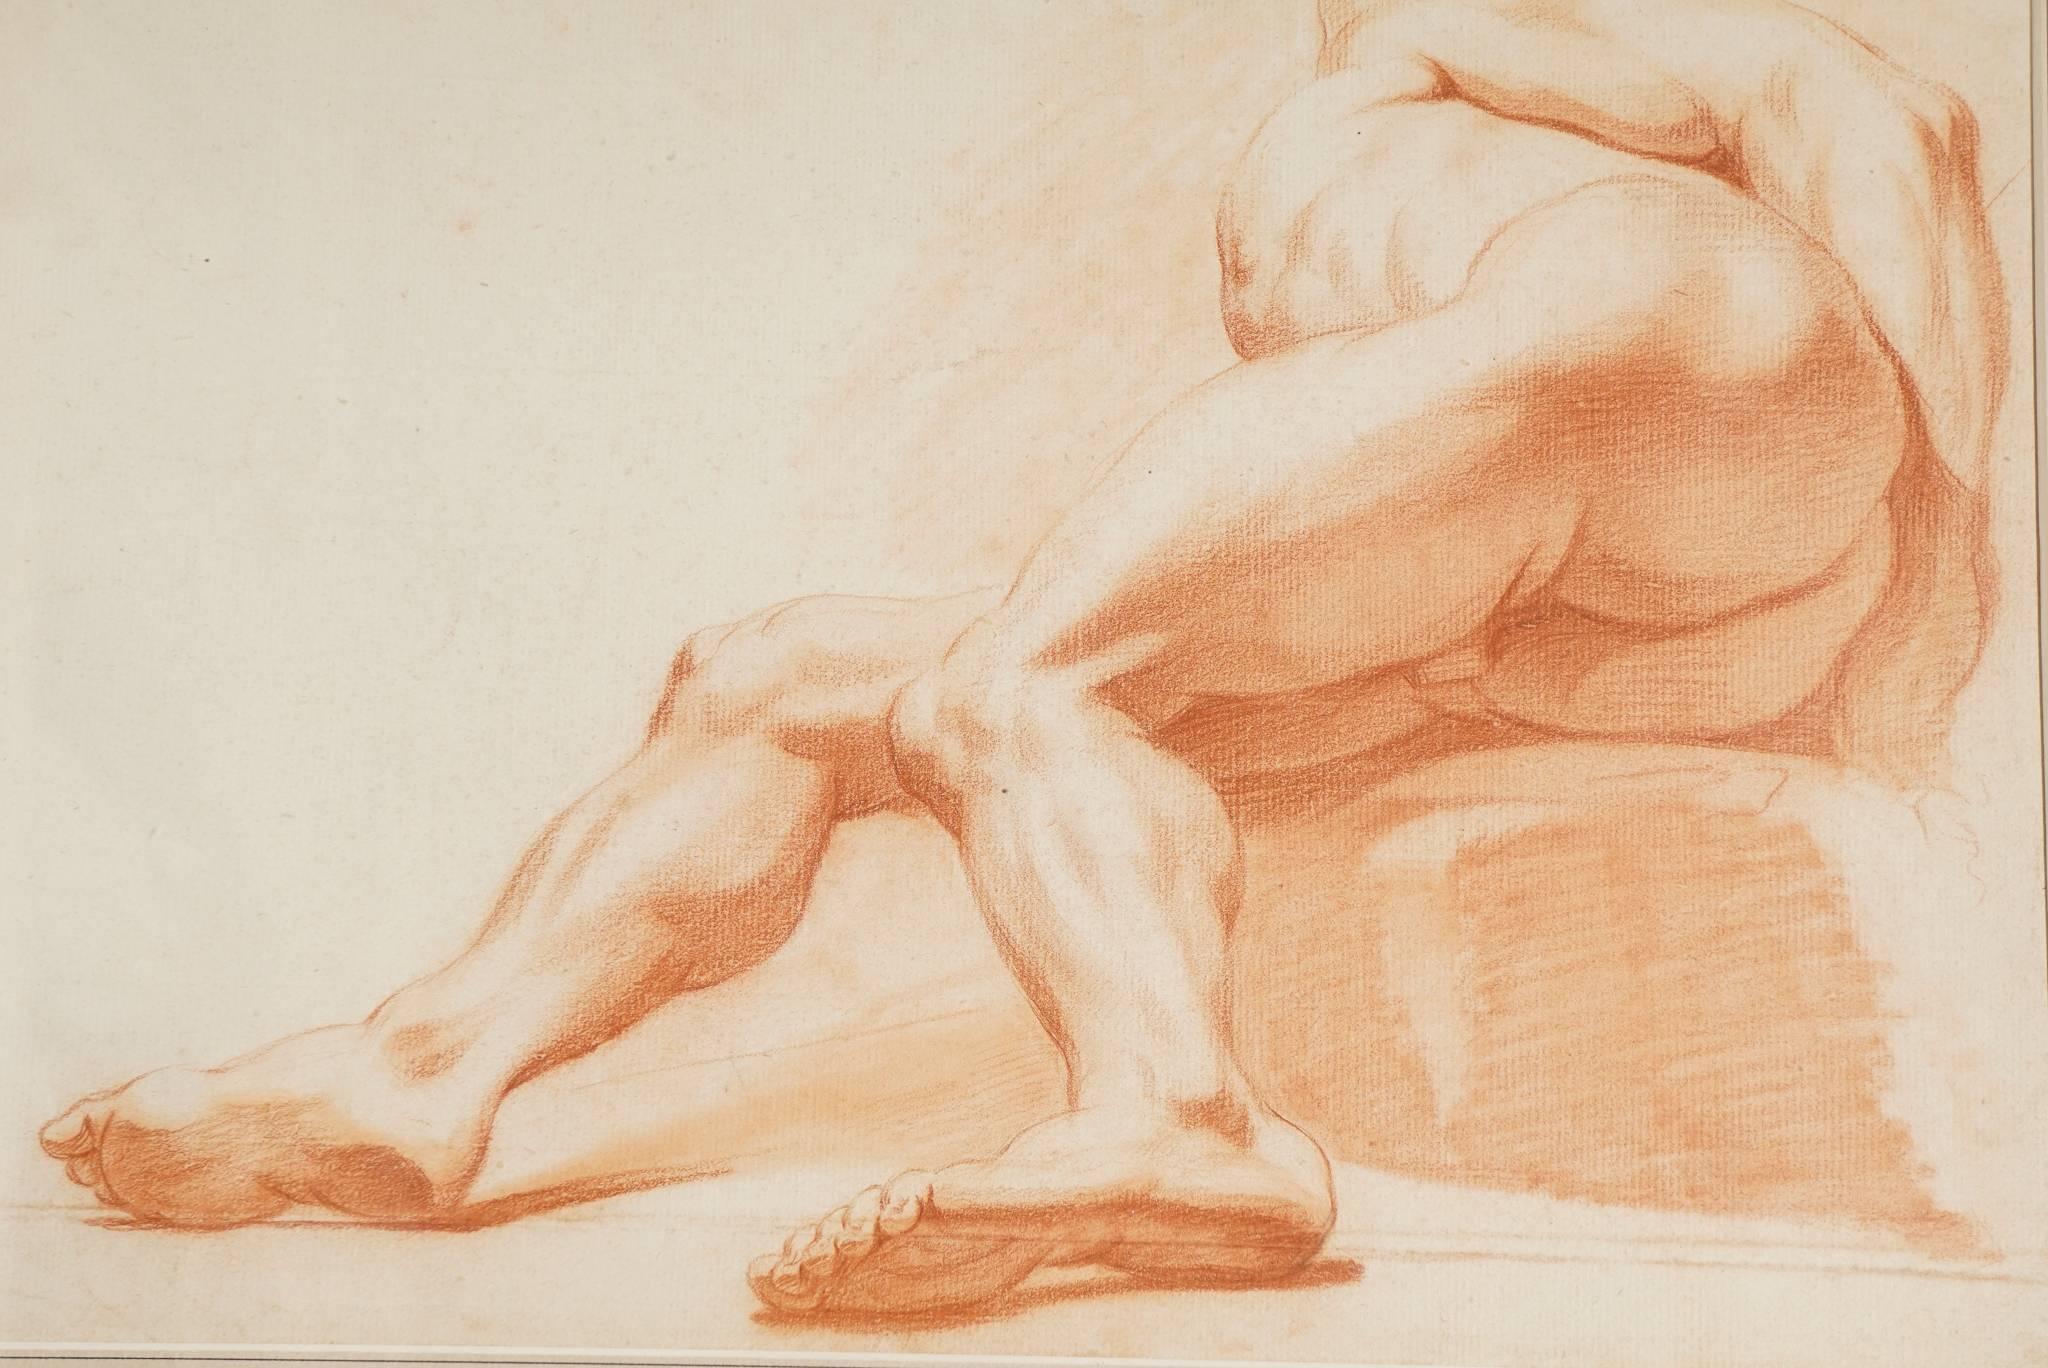 This fine sanguine drawing is French and from the early 19th century. Created as a study for a finished work the drawing is done to confirm the composition form, musculature, shadow lines and perspective nature of the figure. Technically a